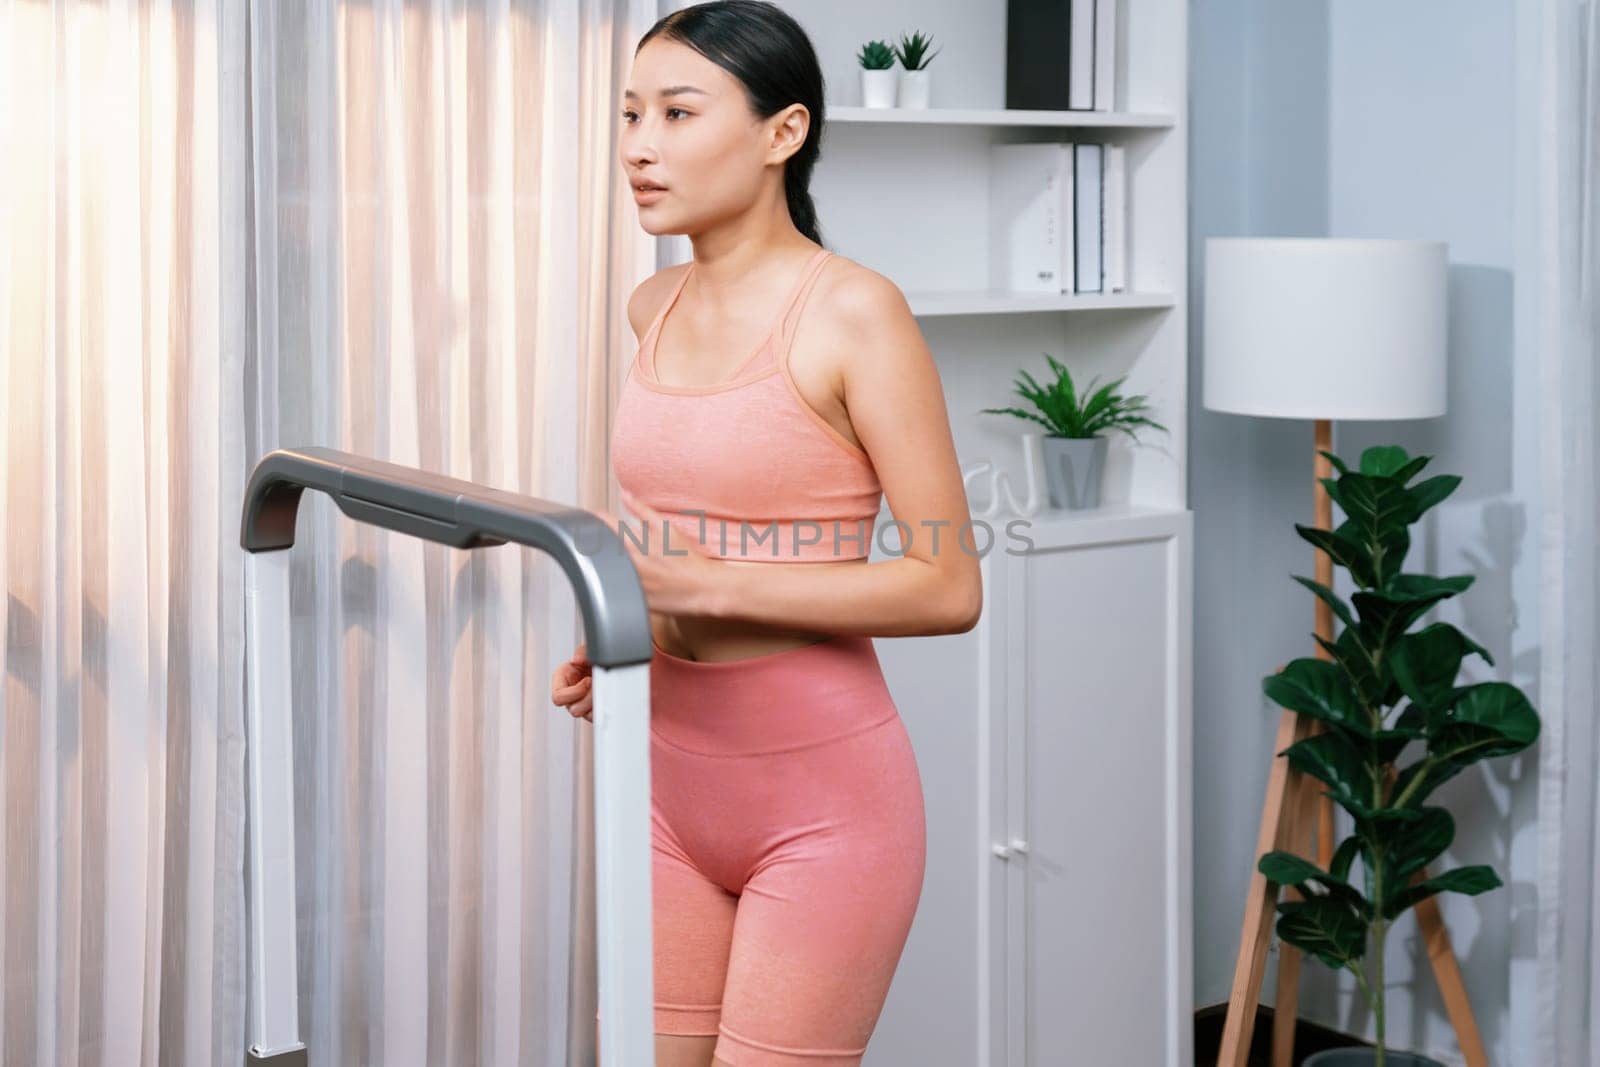 Energetic and strong athletic asian woman running running machine at home. Pursuit of fit physique and commitment to healthy lifestyle with home workout and training. Vigorous